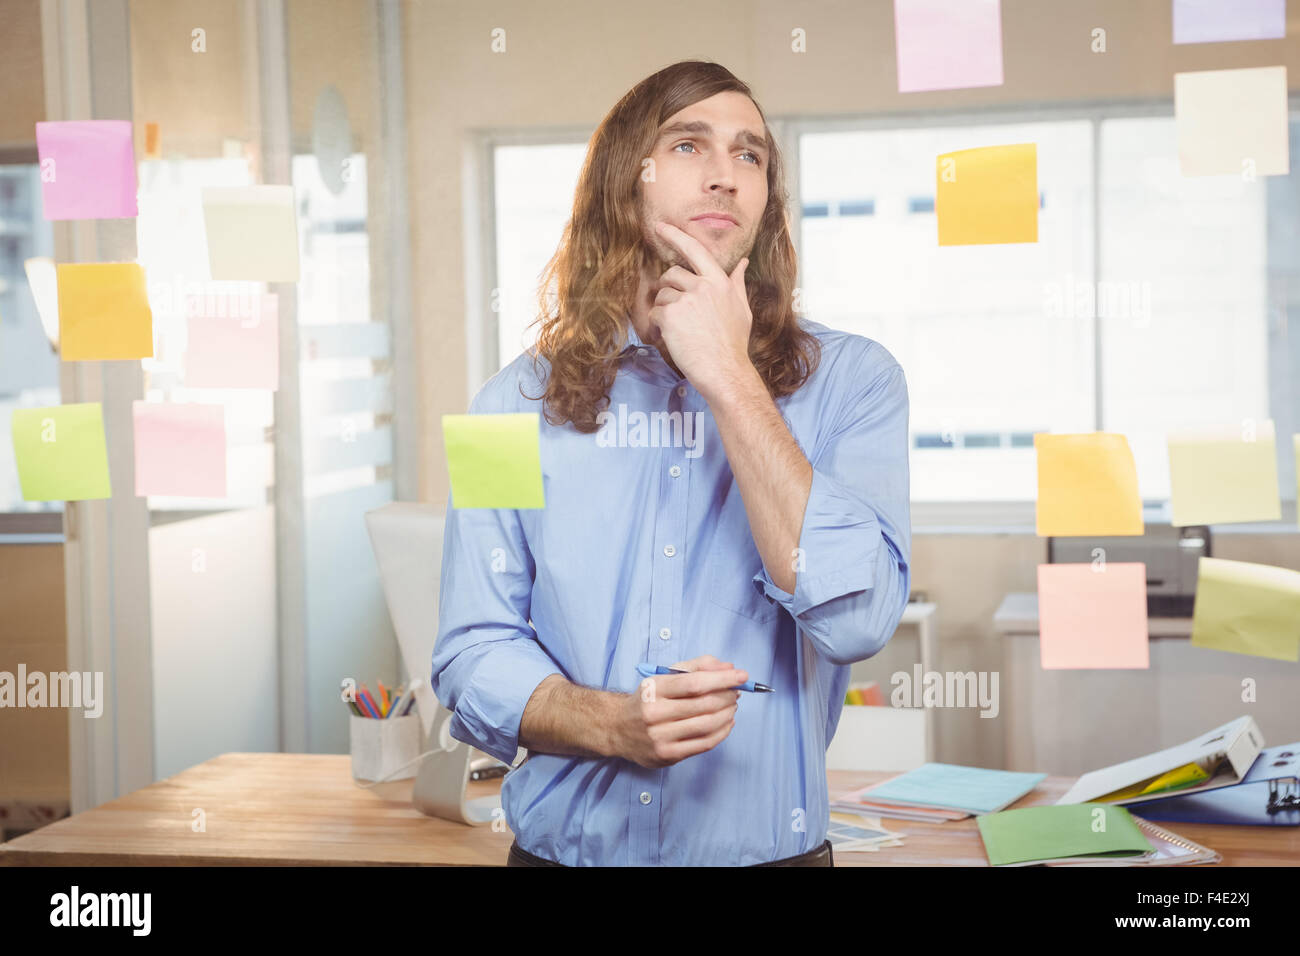 Thoughtful businessman looking at sticky notes Stock Photo